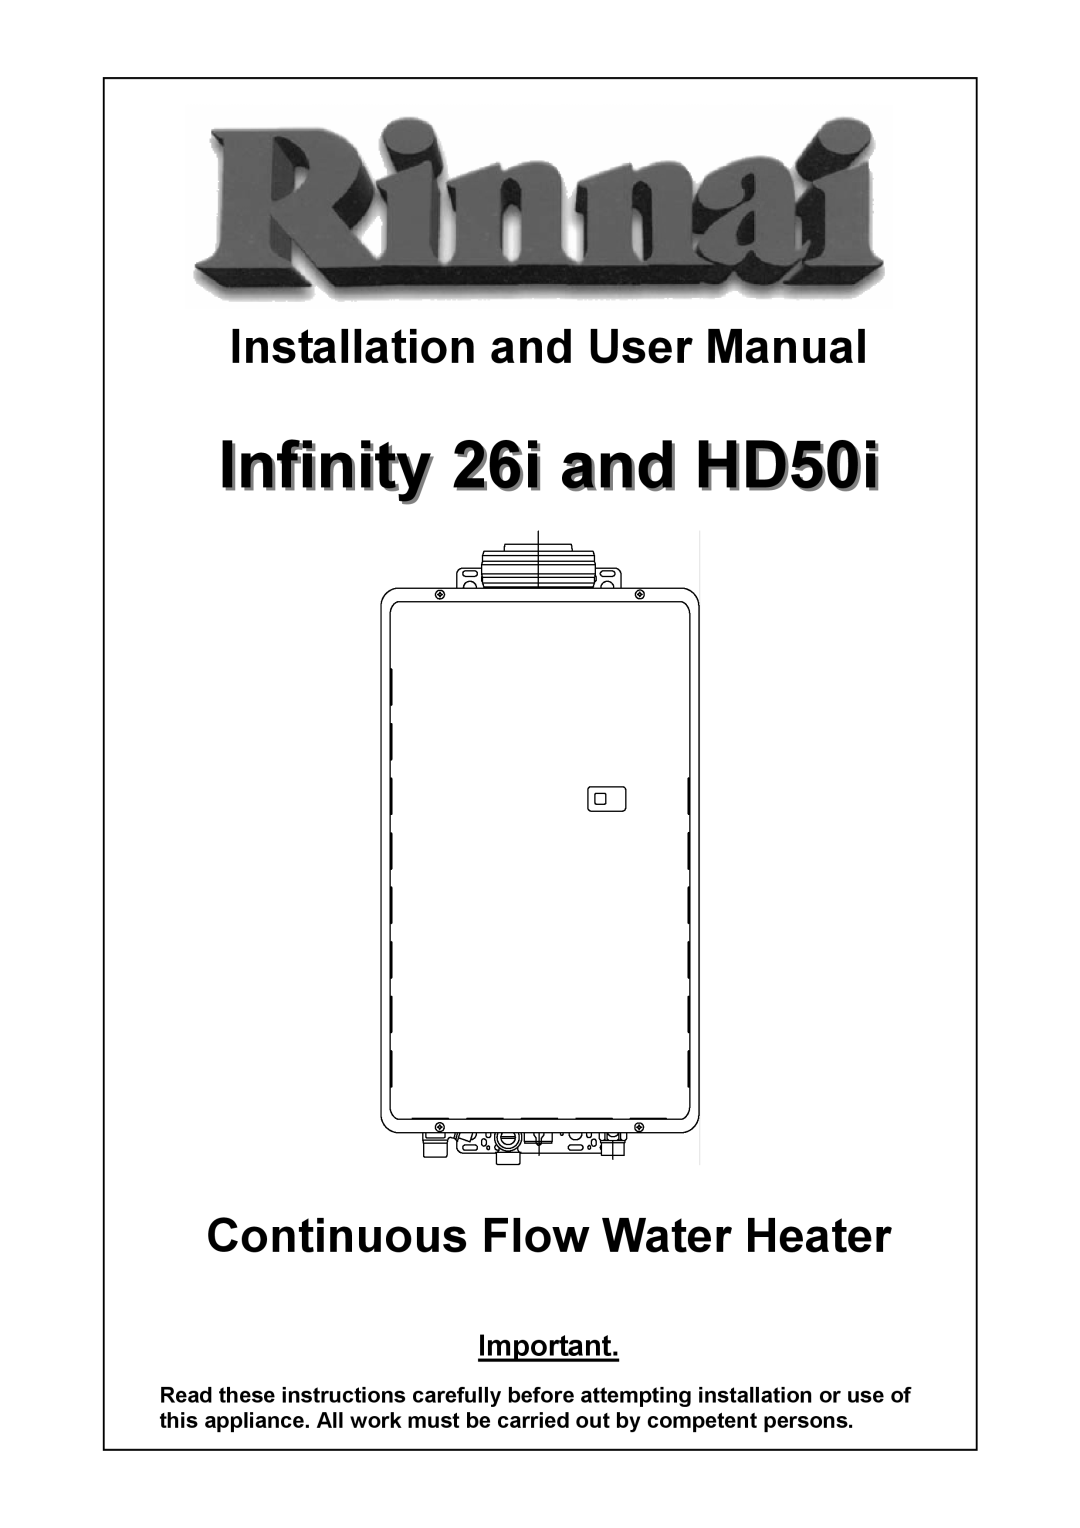 Rinnai 26i, HD50i user manual Infinity 26i and HD50i, Continuous Flow Water Heater 